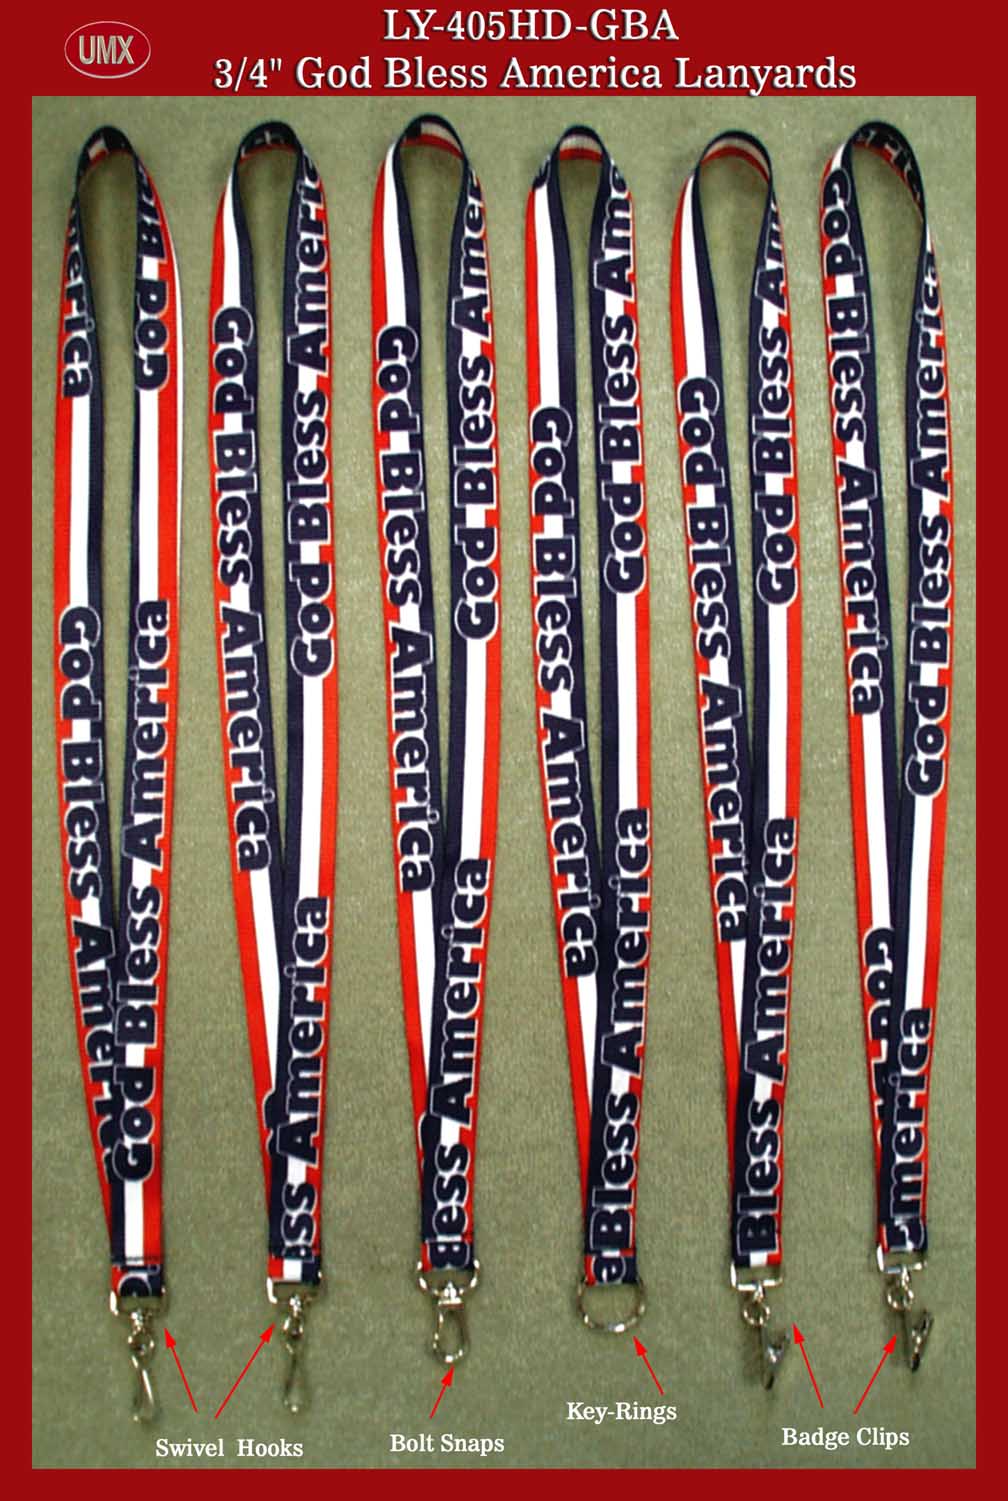 A1 - God Bless American Custom Logo Lanyard with Blue, Red and White Color Strips